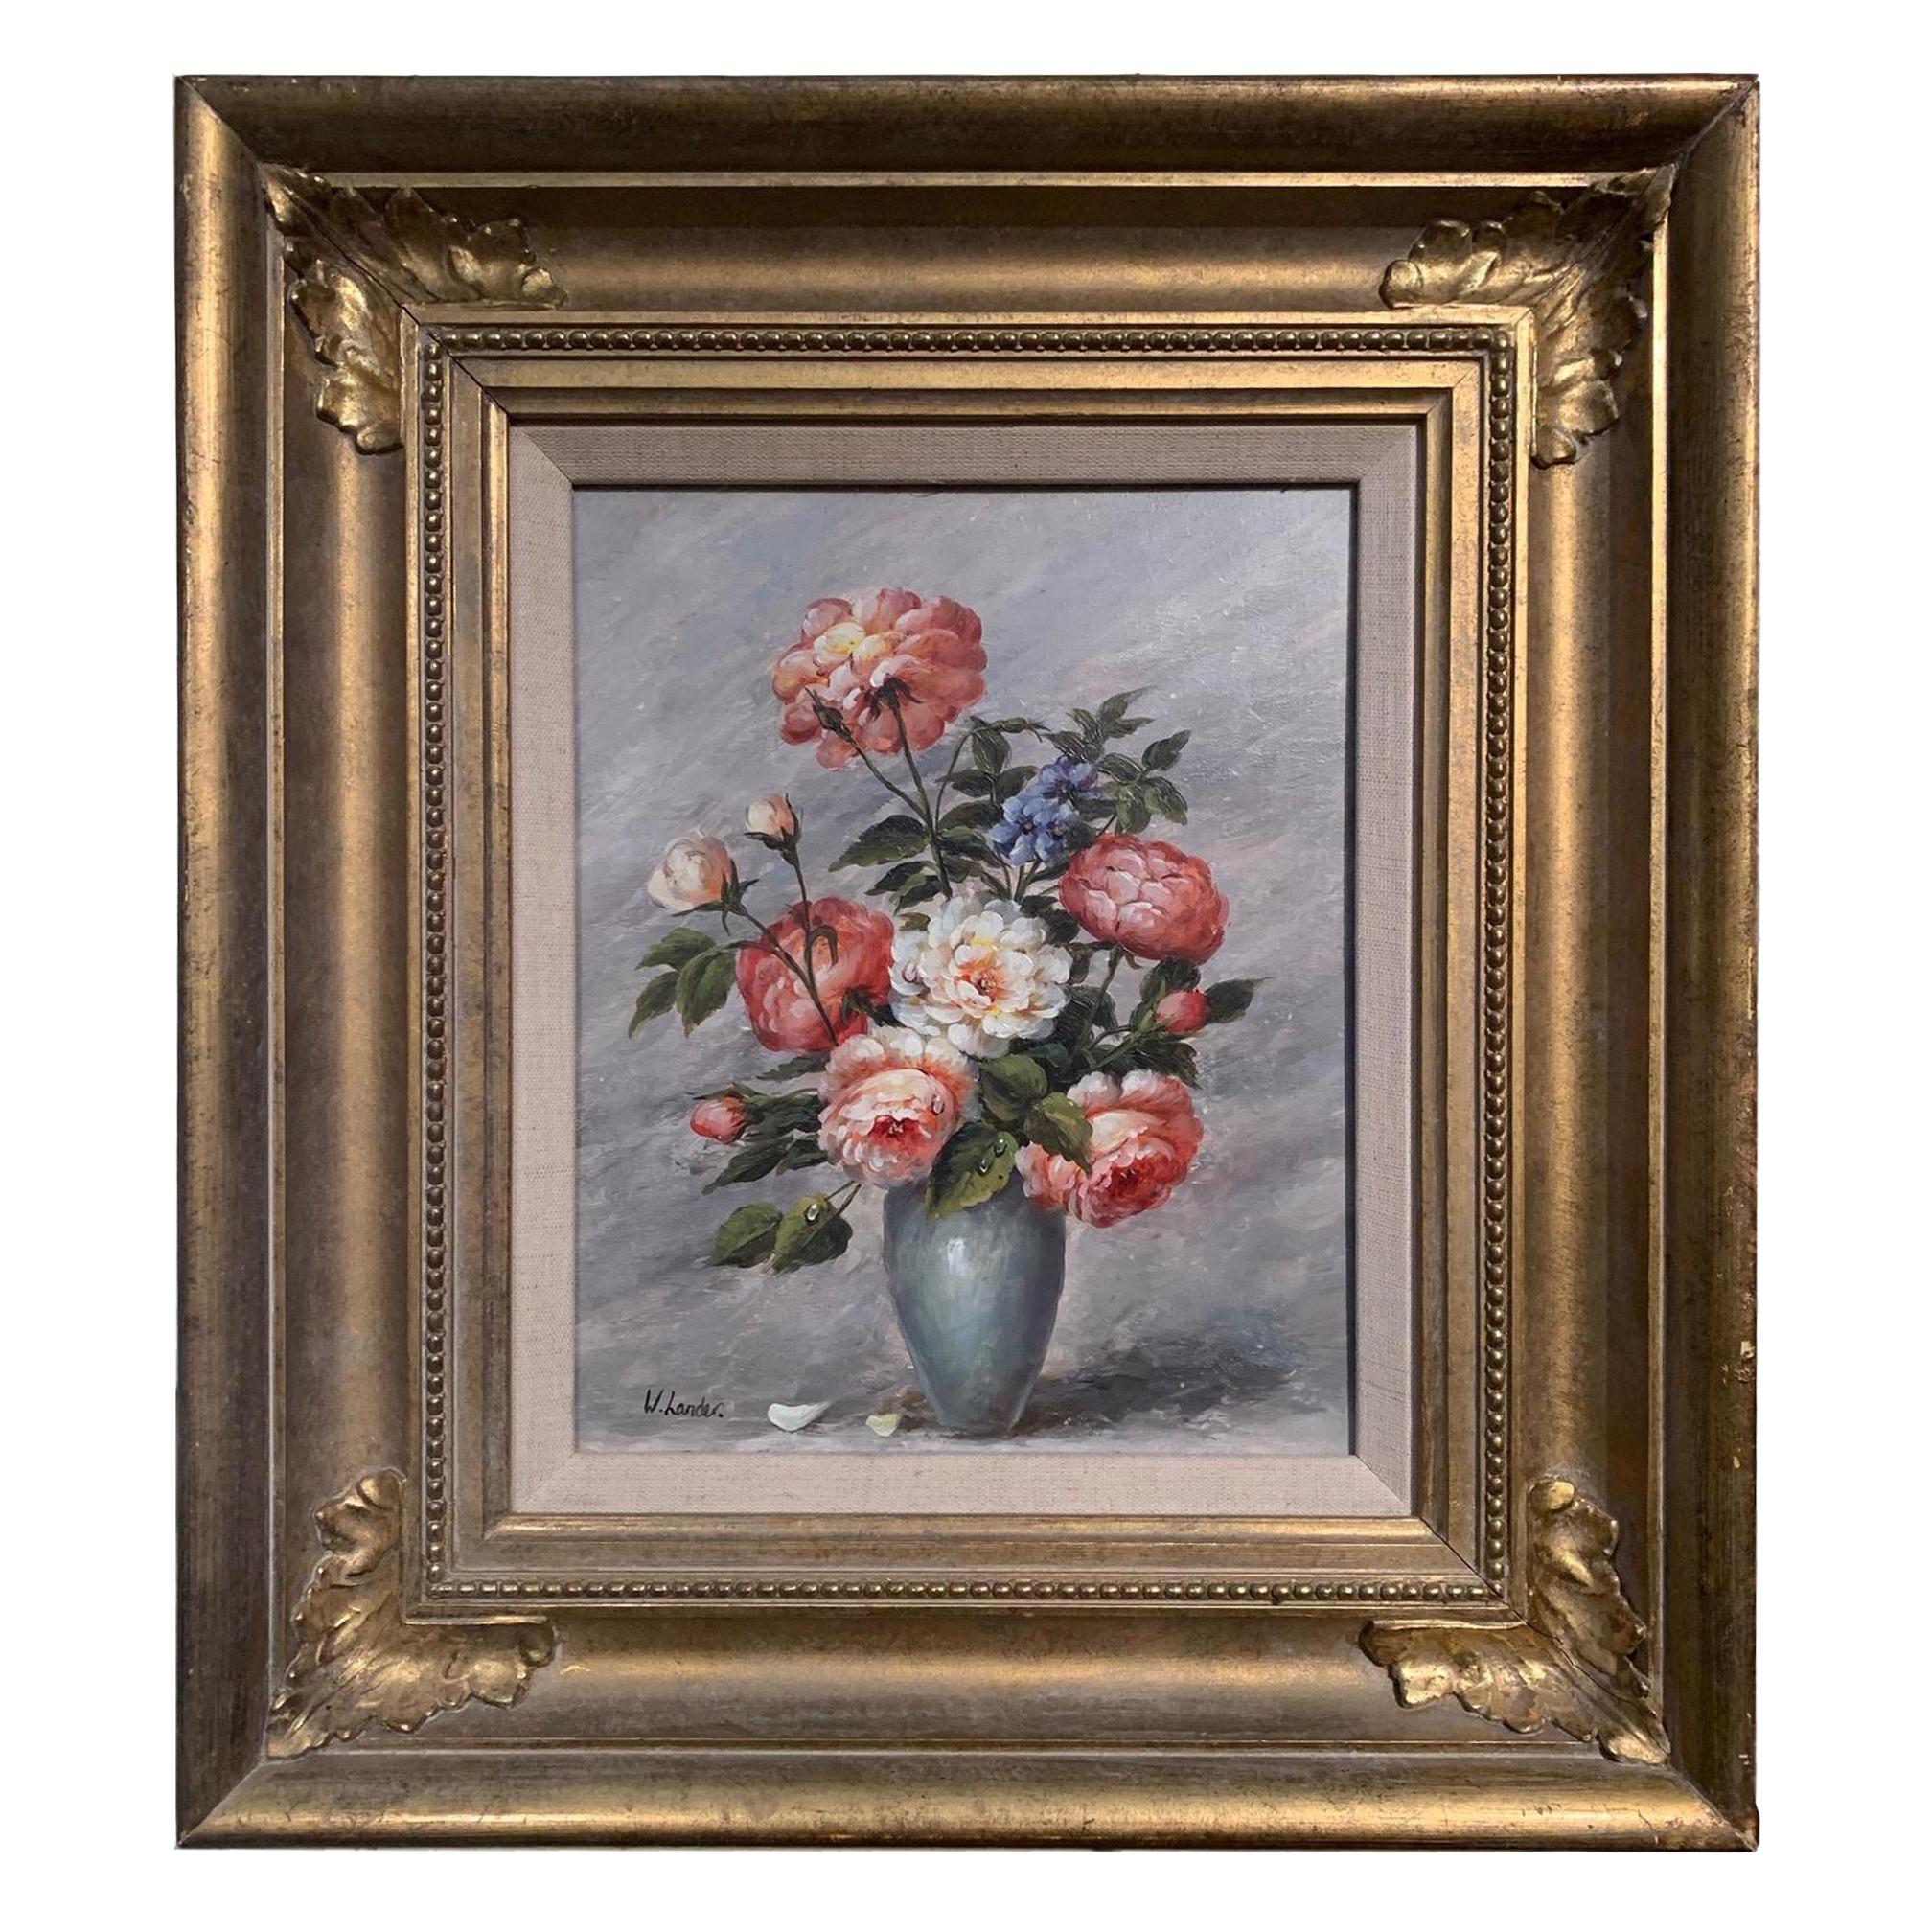 19th Century Oil on Board, "Flowers" Signed W. Lander, English